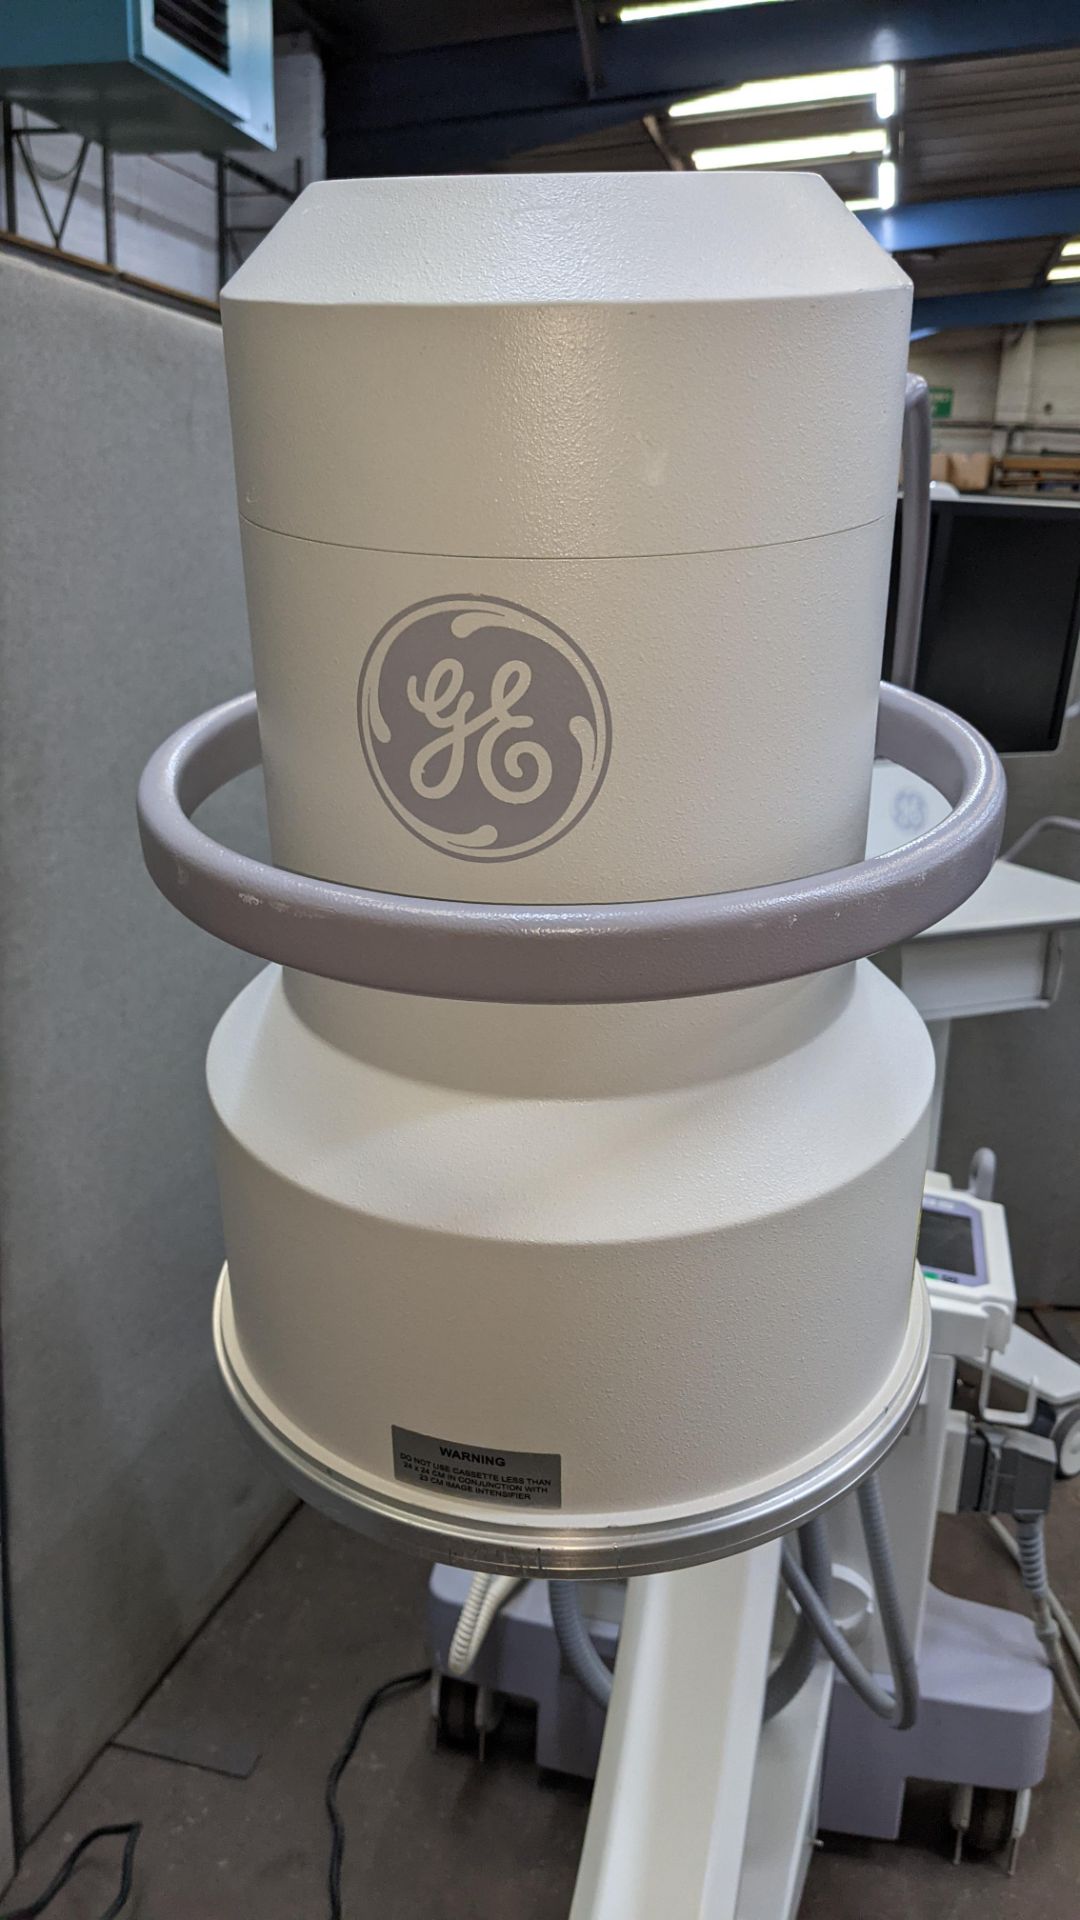 GE-OEC Fluorostar imaging system, purchased new in August 2017. EO4 Series. - Image 32 of 68